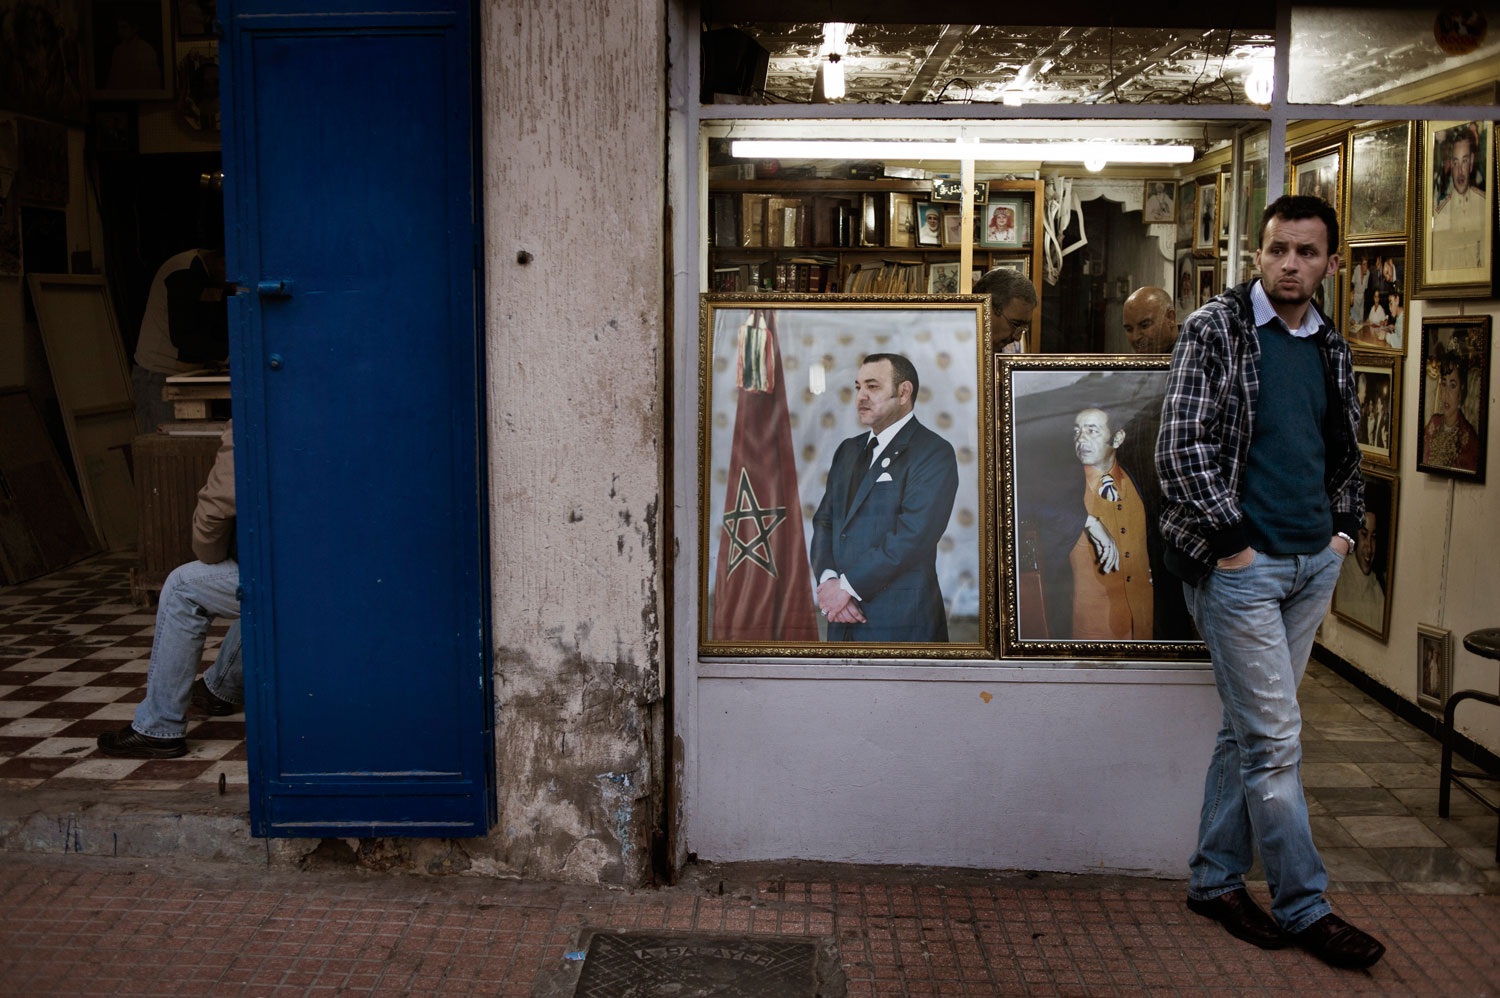 March 2012. A Moroccan man stands next to the portraits of King Mohammed in the old souk in Rabat, Morocco. The monarch is widely accepted as “commander of the faithful,” which makes any direct criticism of him close to sacrilegious. But there is widespread dissatisfaction over corruption among his close aides.